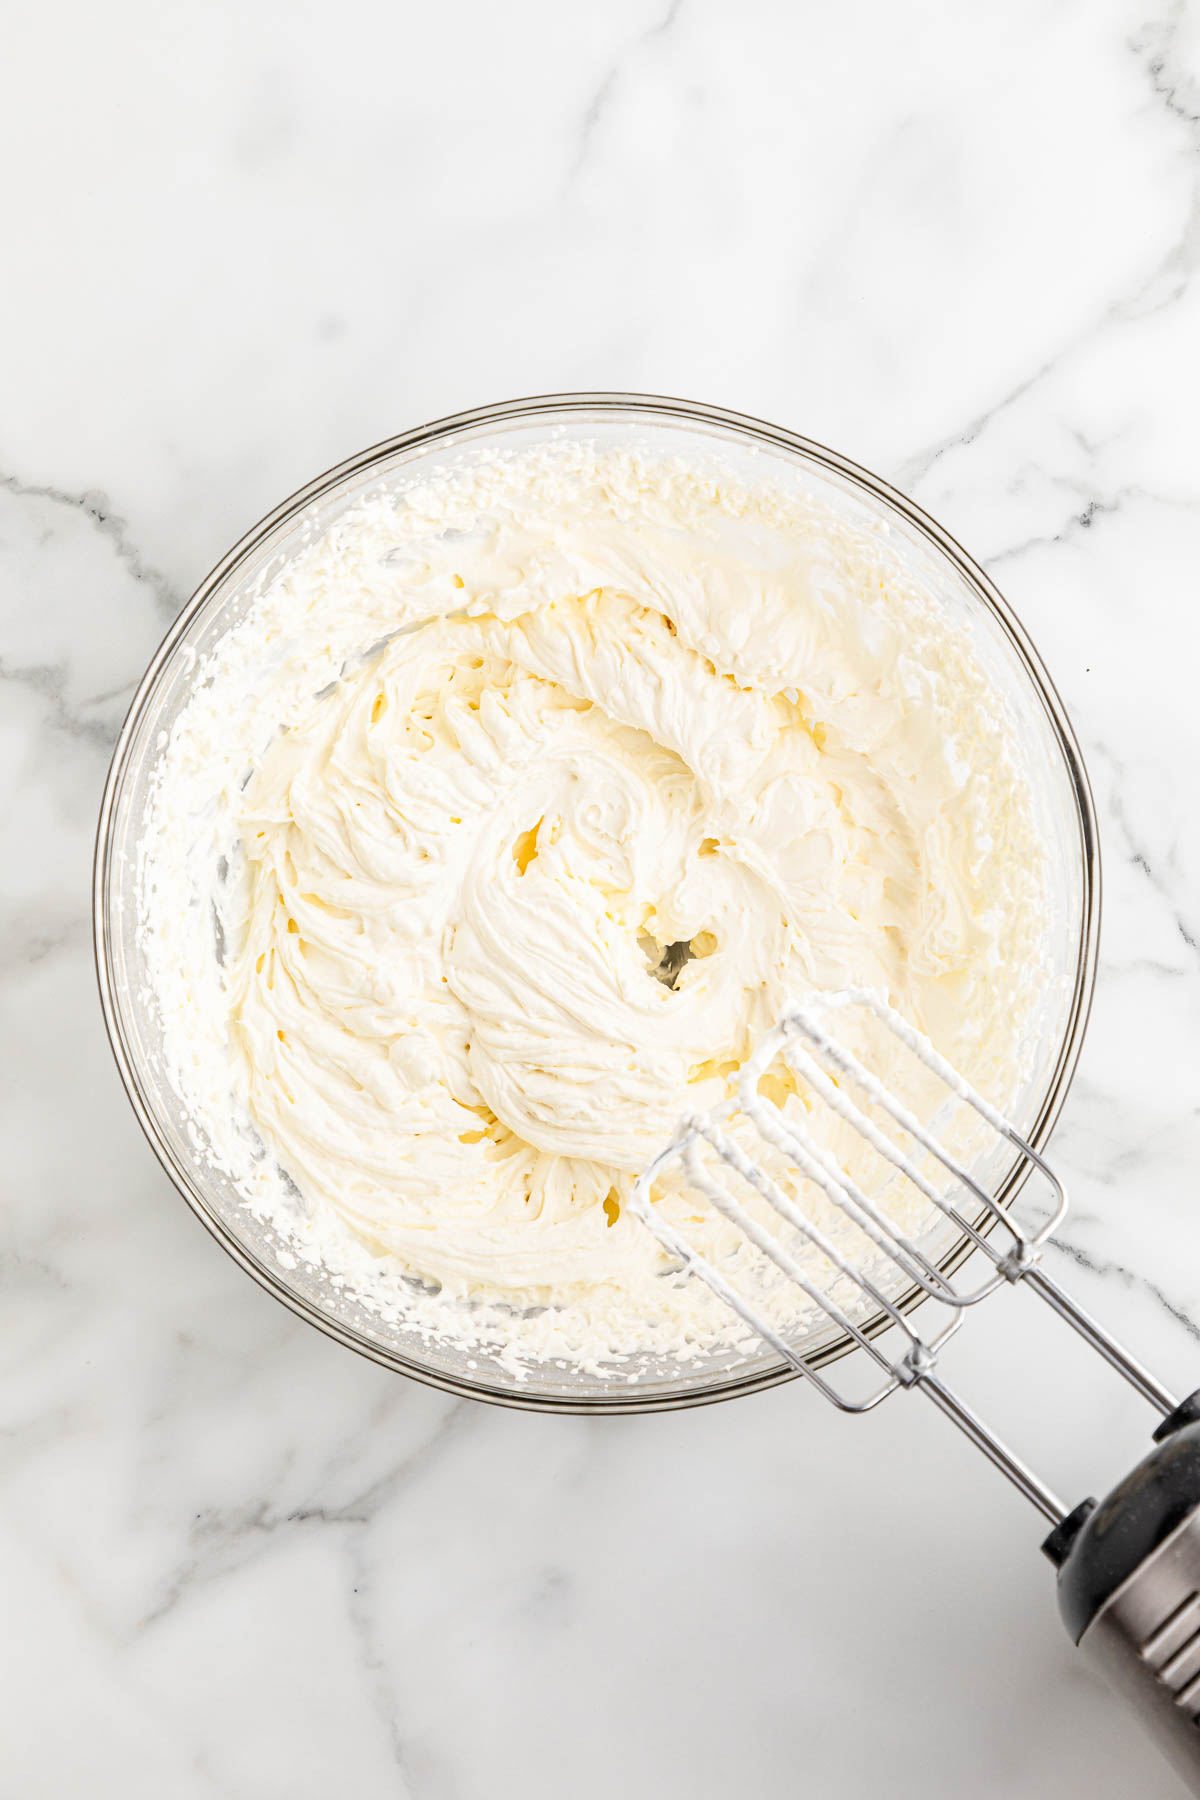 Whipping cream in a bowl with a mixer